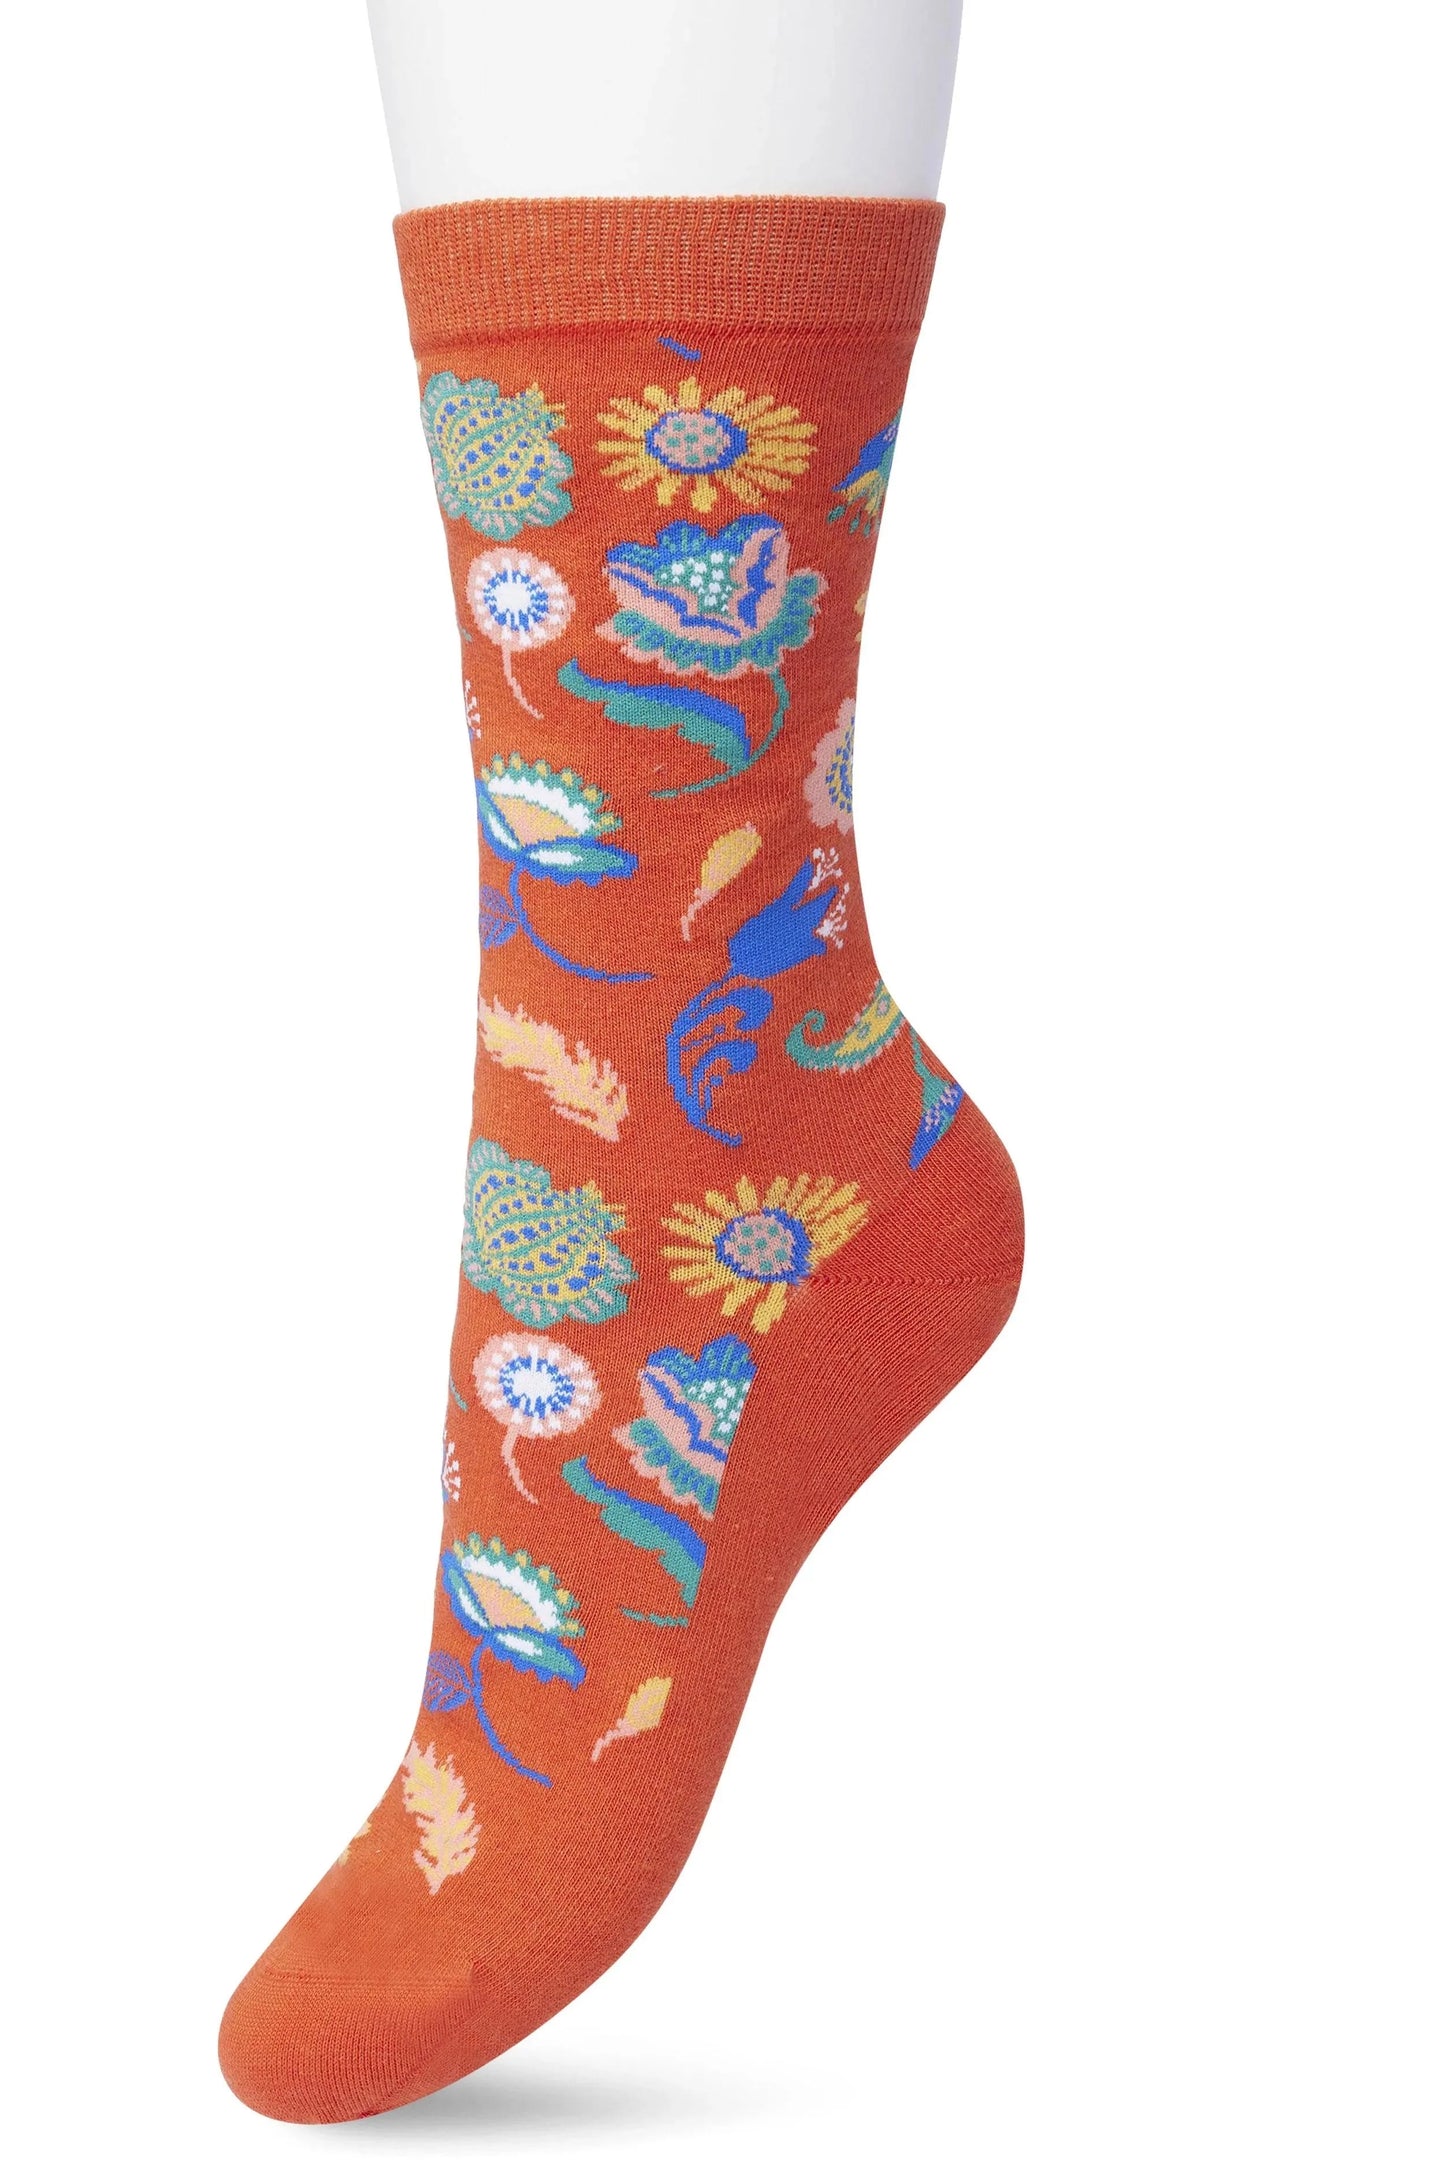 Bonnie Doon BP211121 Flower Fantasy Sock - orange cotton ankle socks with a woven multicoloured floral pattern.